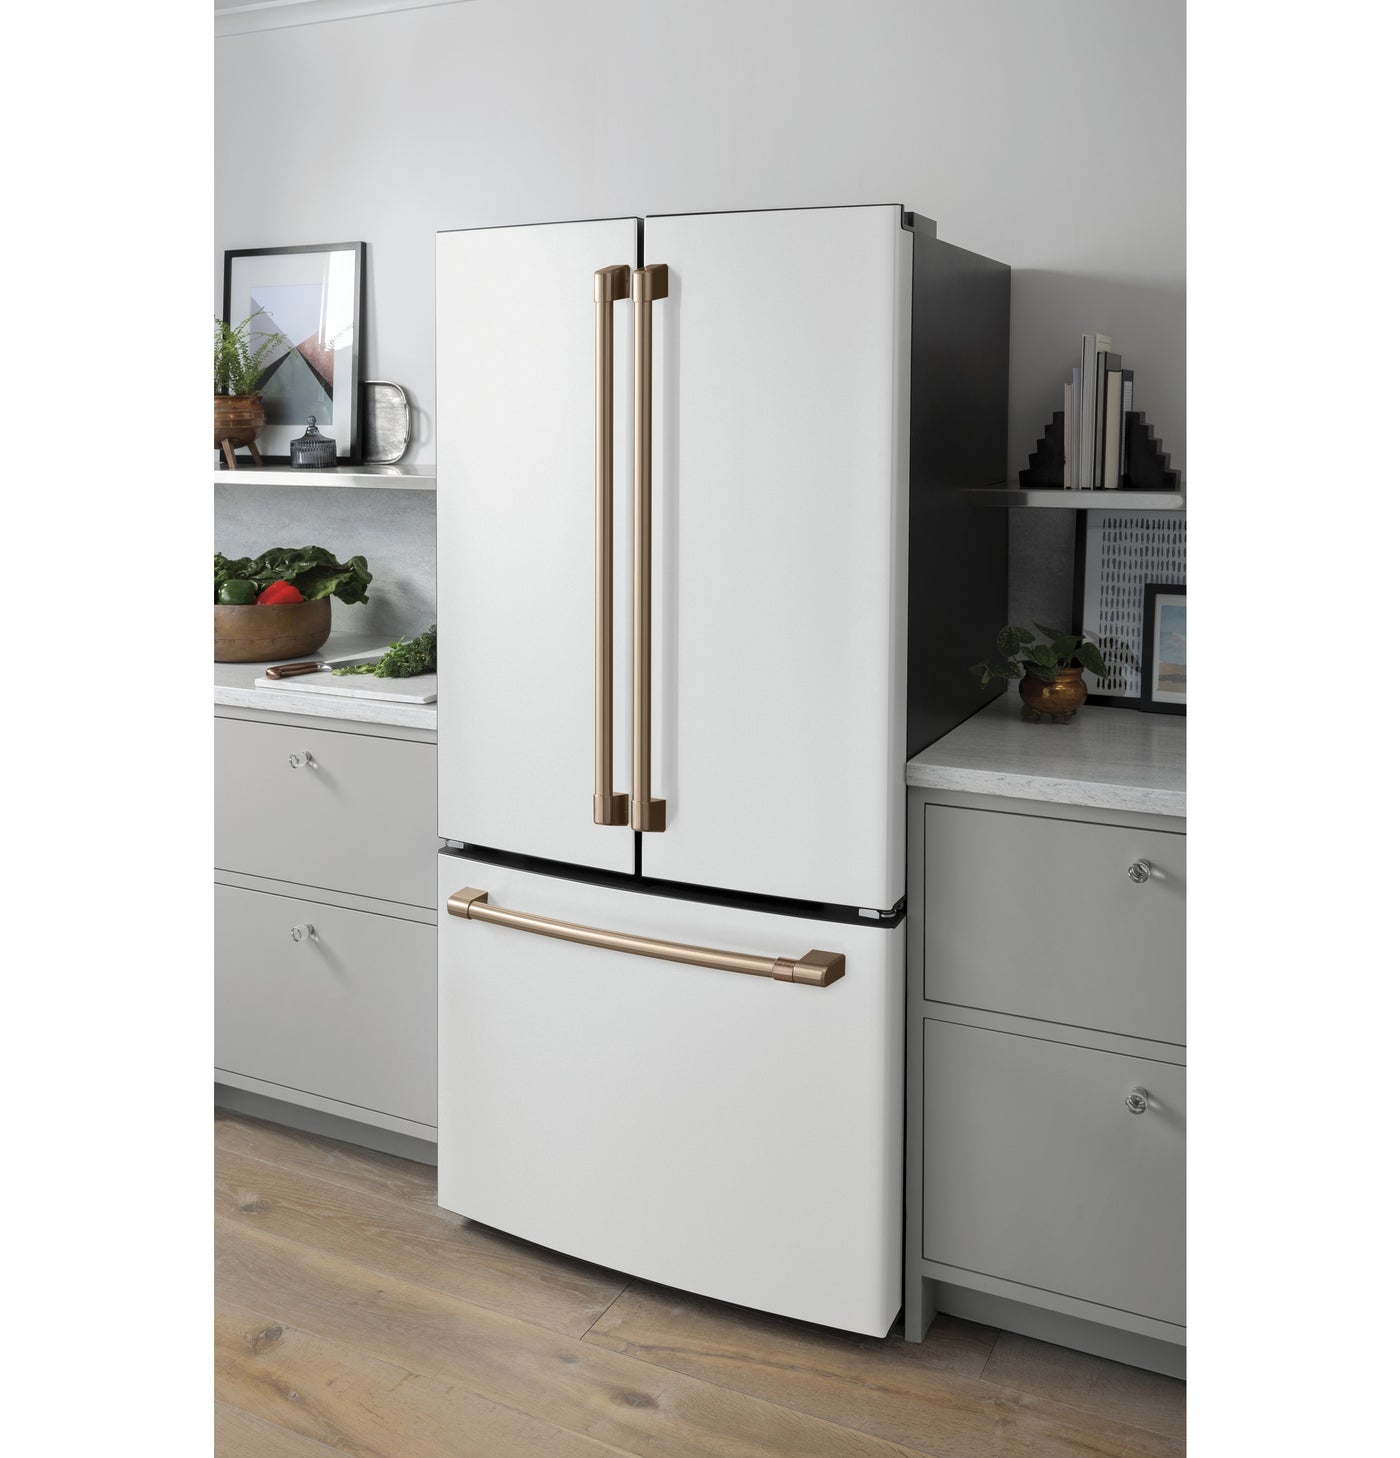 Café Matte White 33" Counter-Depth French-Door Refrigerator (18.6 Cu. Ft.) - CWE19SP4NW2